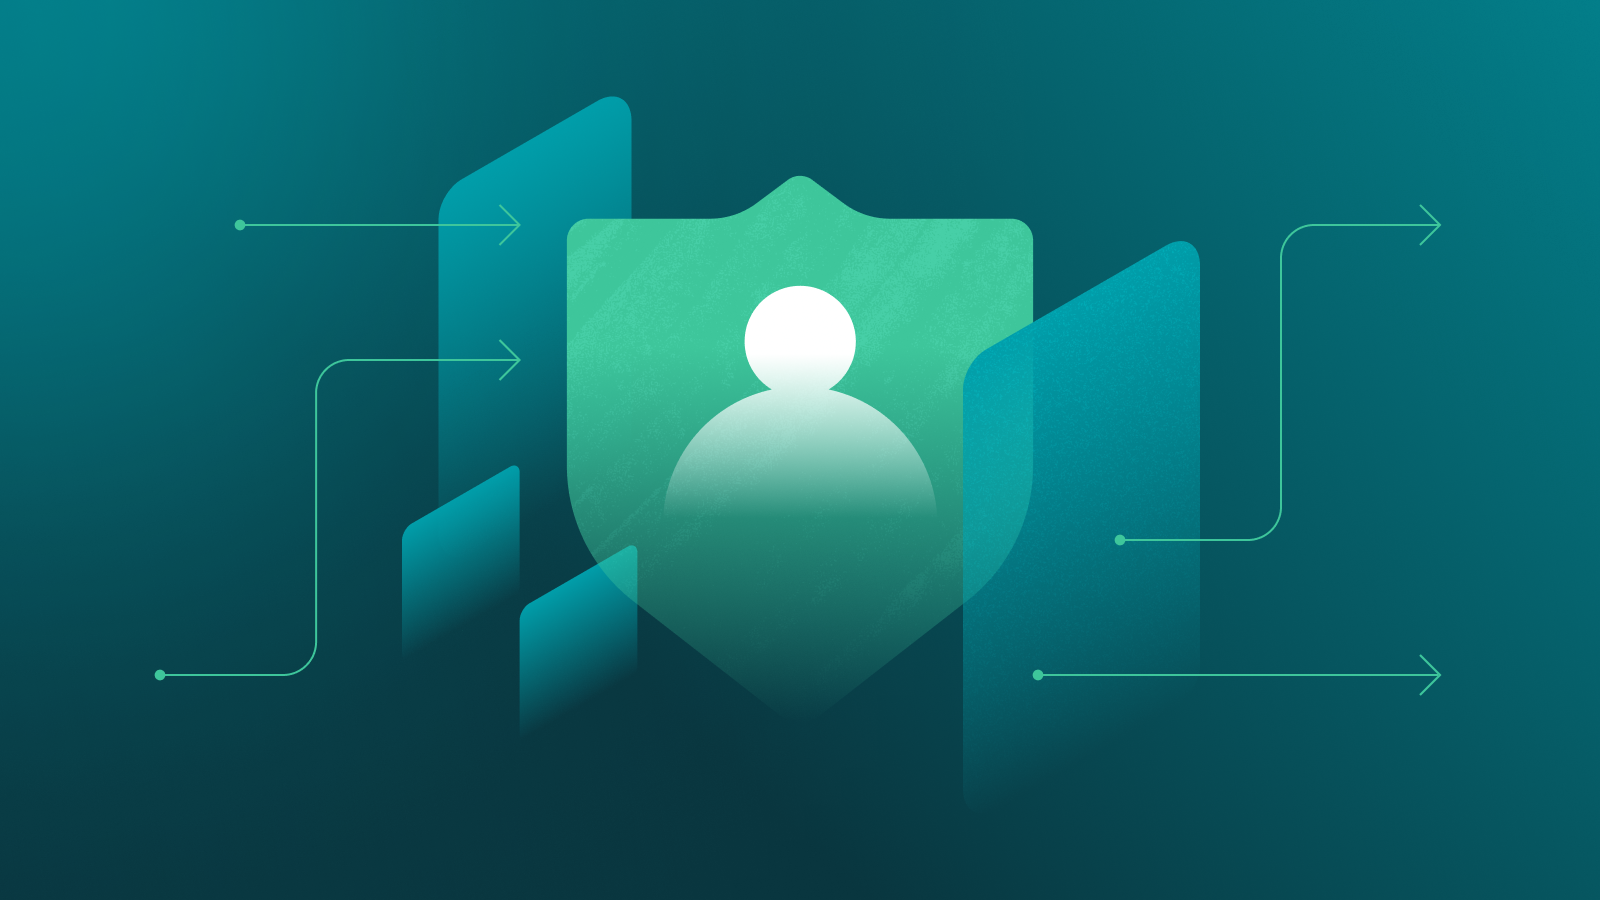 new Dashlane - credential security so every business can thrive blog image